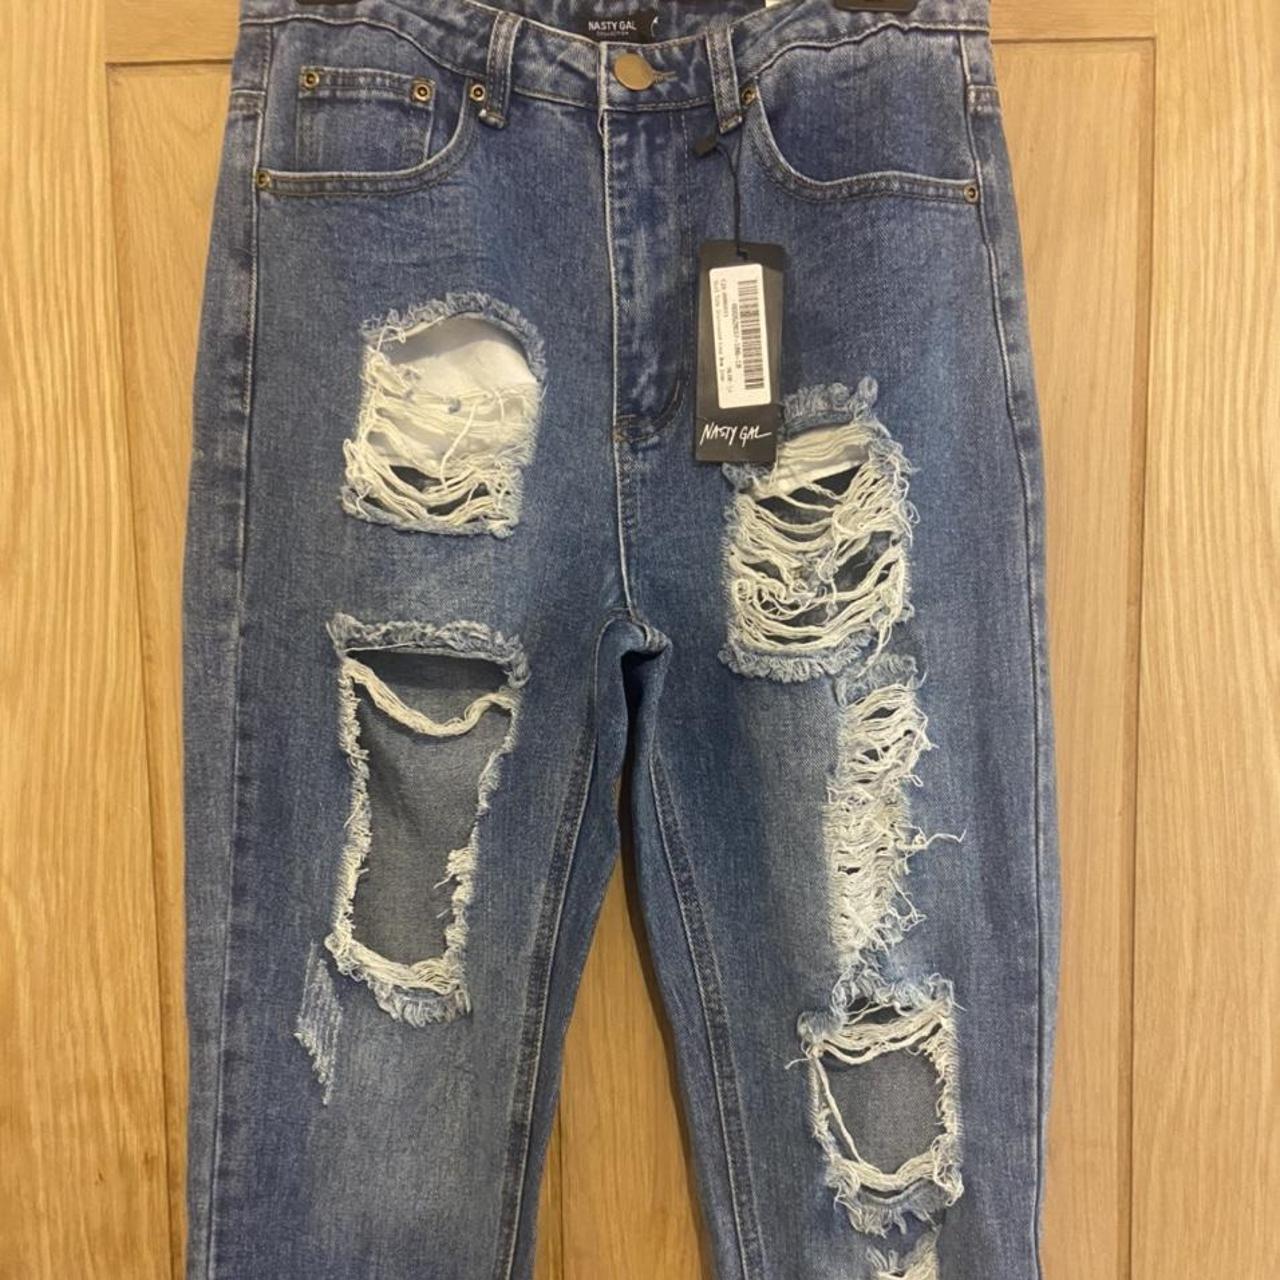 BRAND NEW WITH TAG Nasty Gal ripped jeans Size UK 10 - Depop